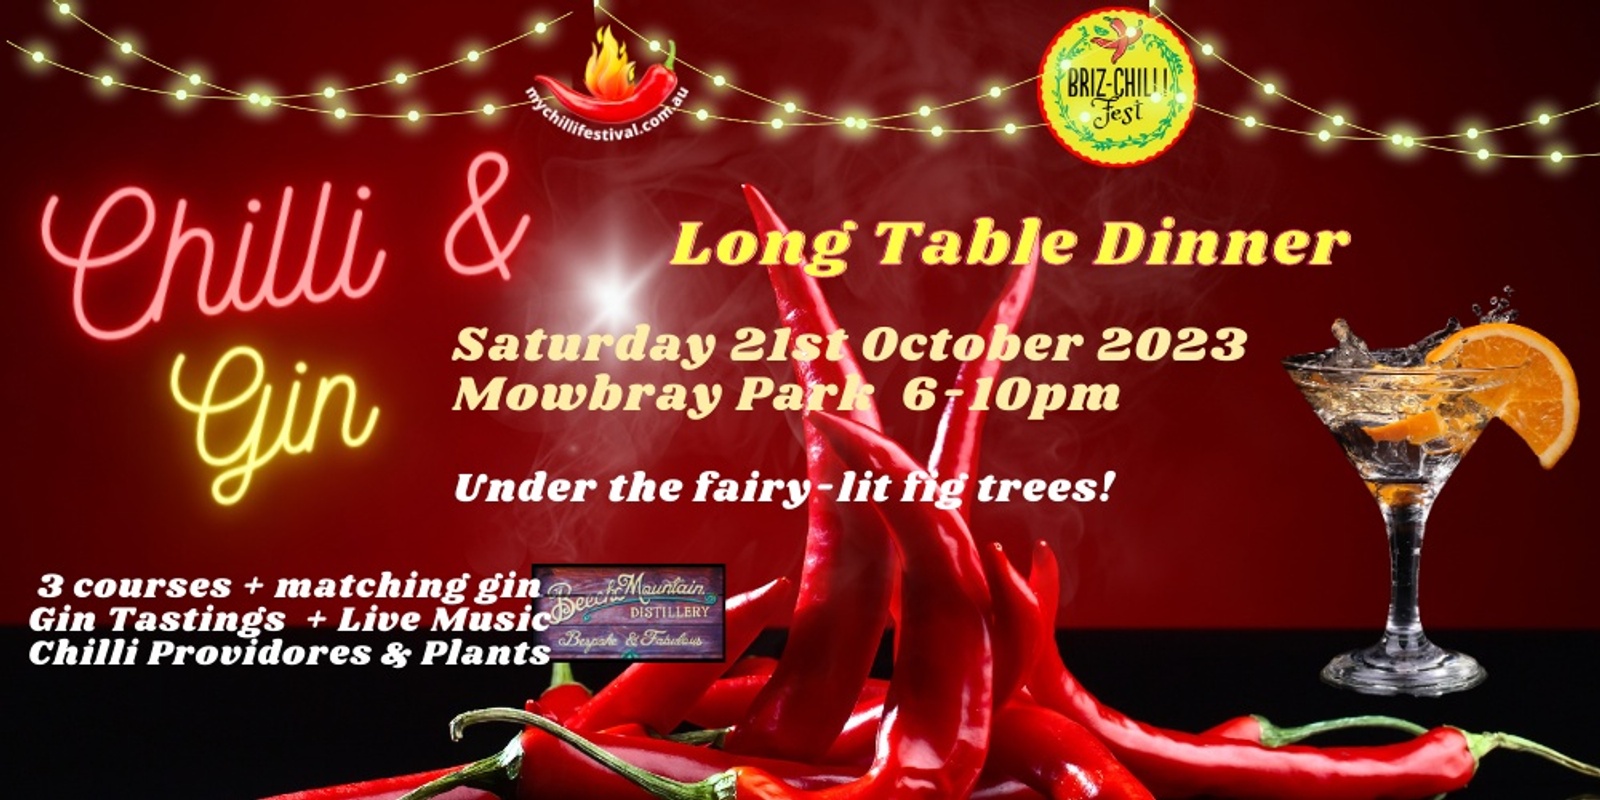 Chilli and Gin Long Table Dinner in Mowbray Park 